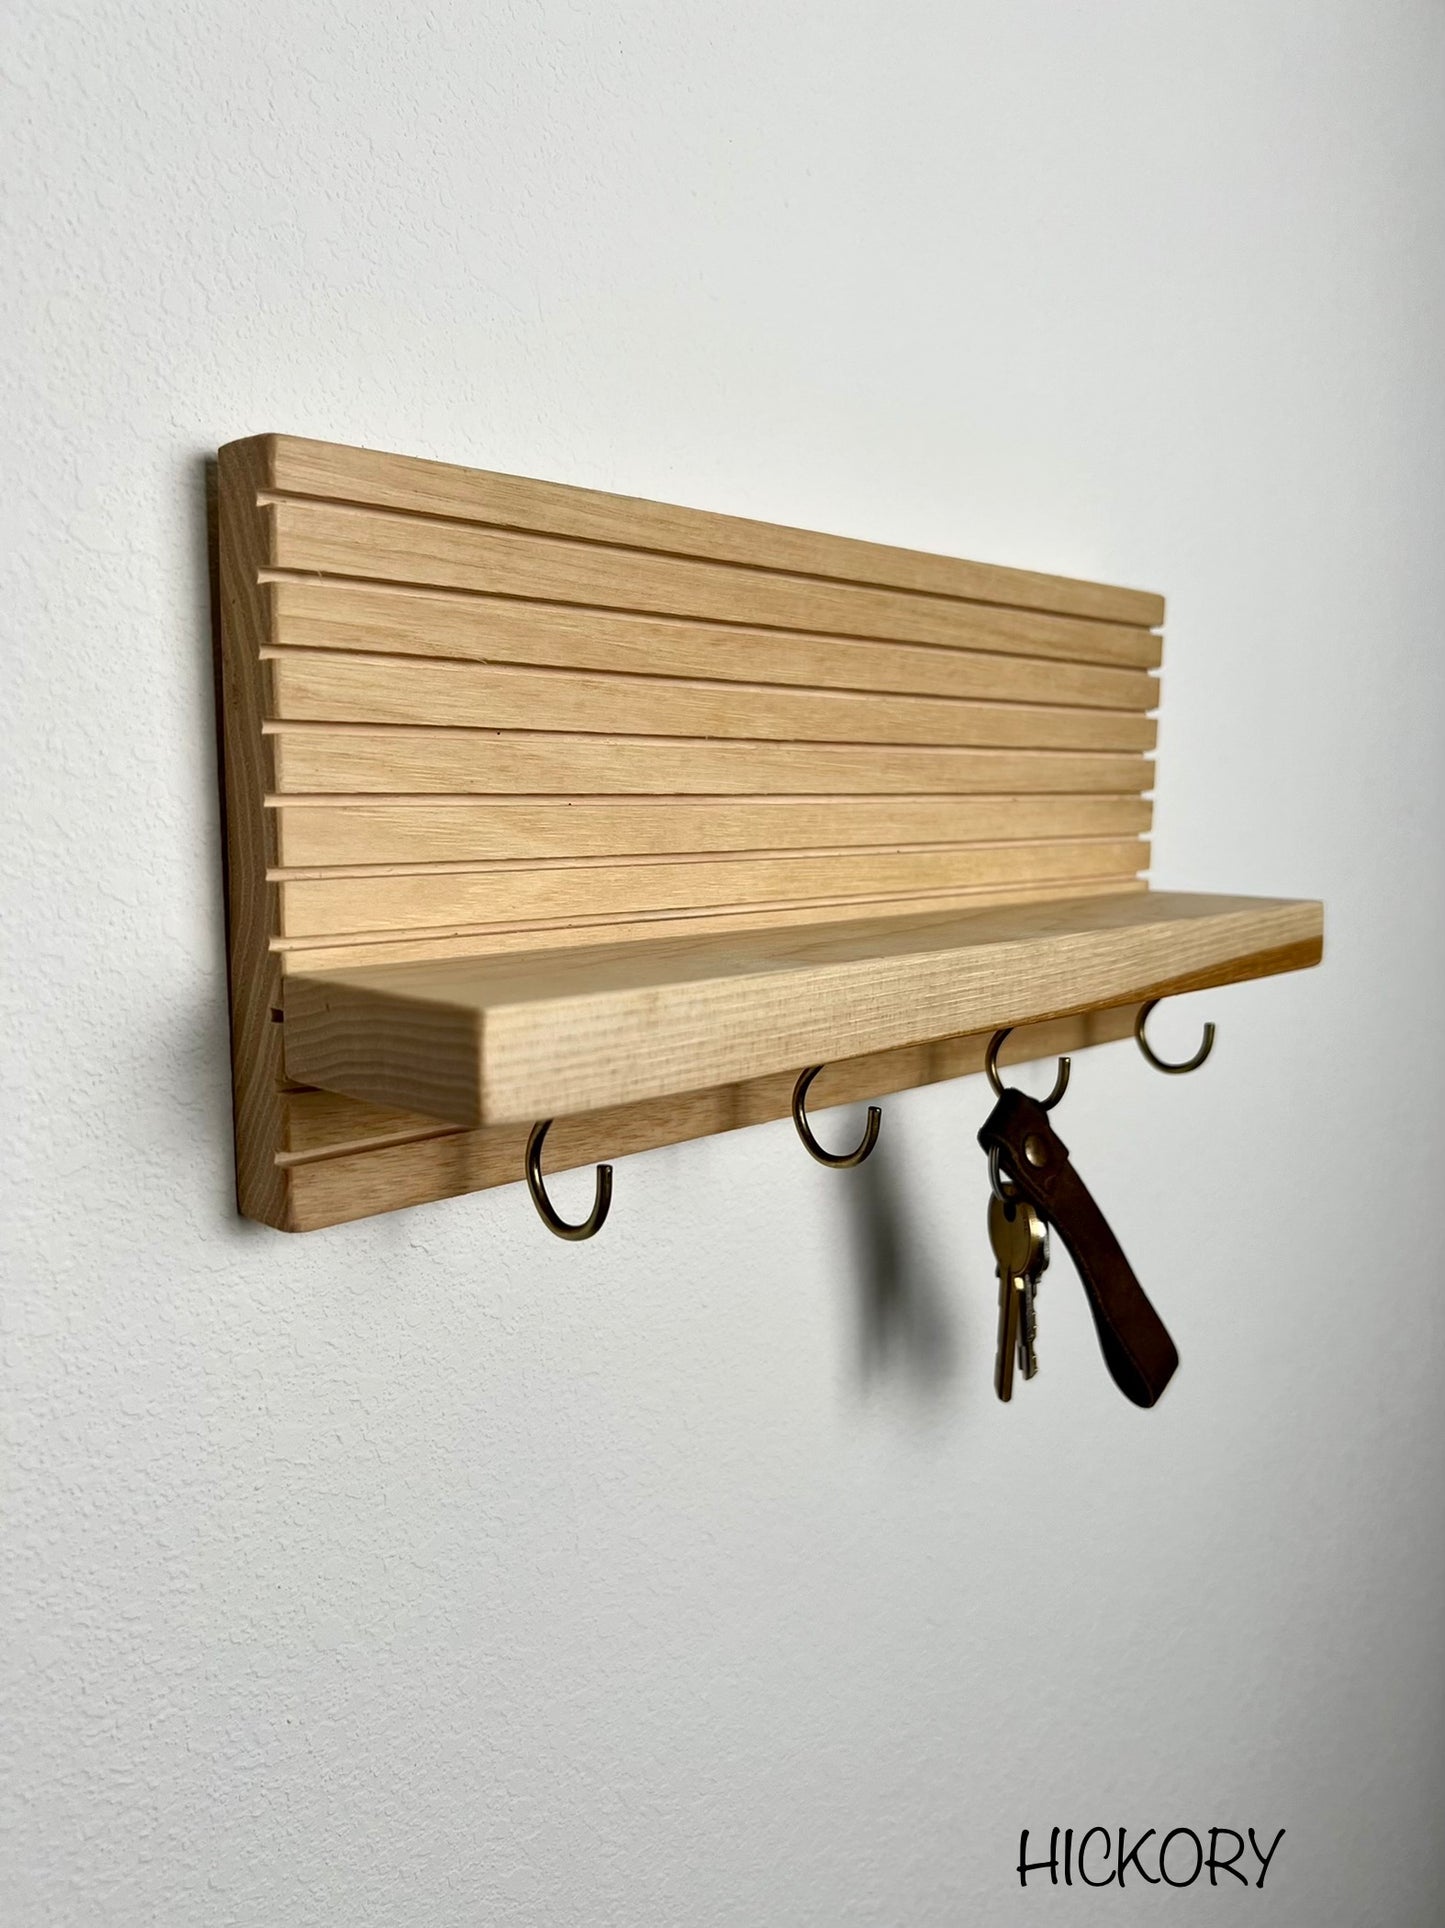 Hardwood Entryway Organizer | All sizes and woods